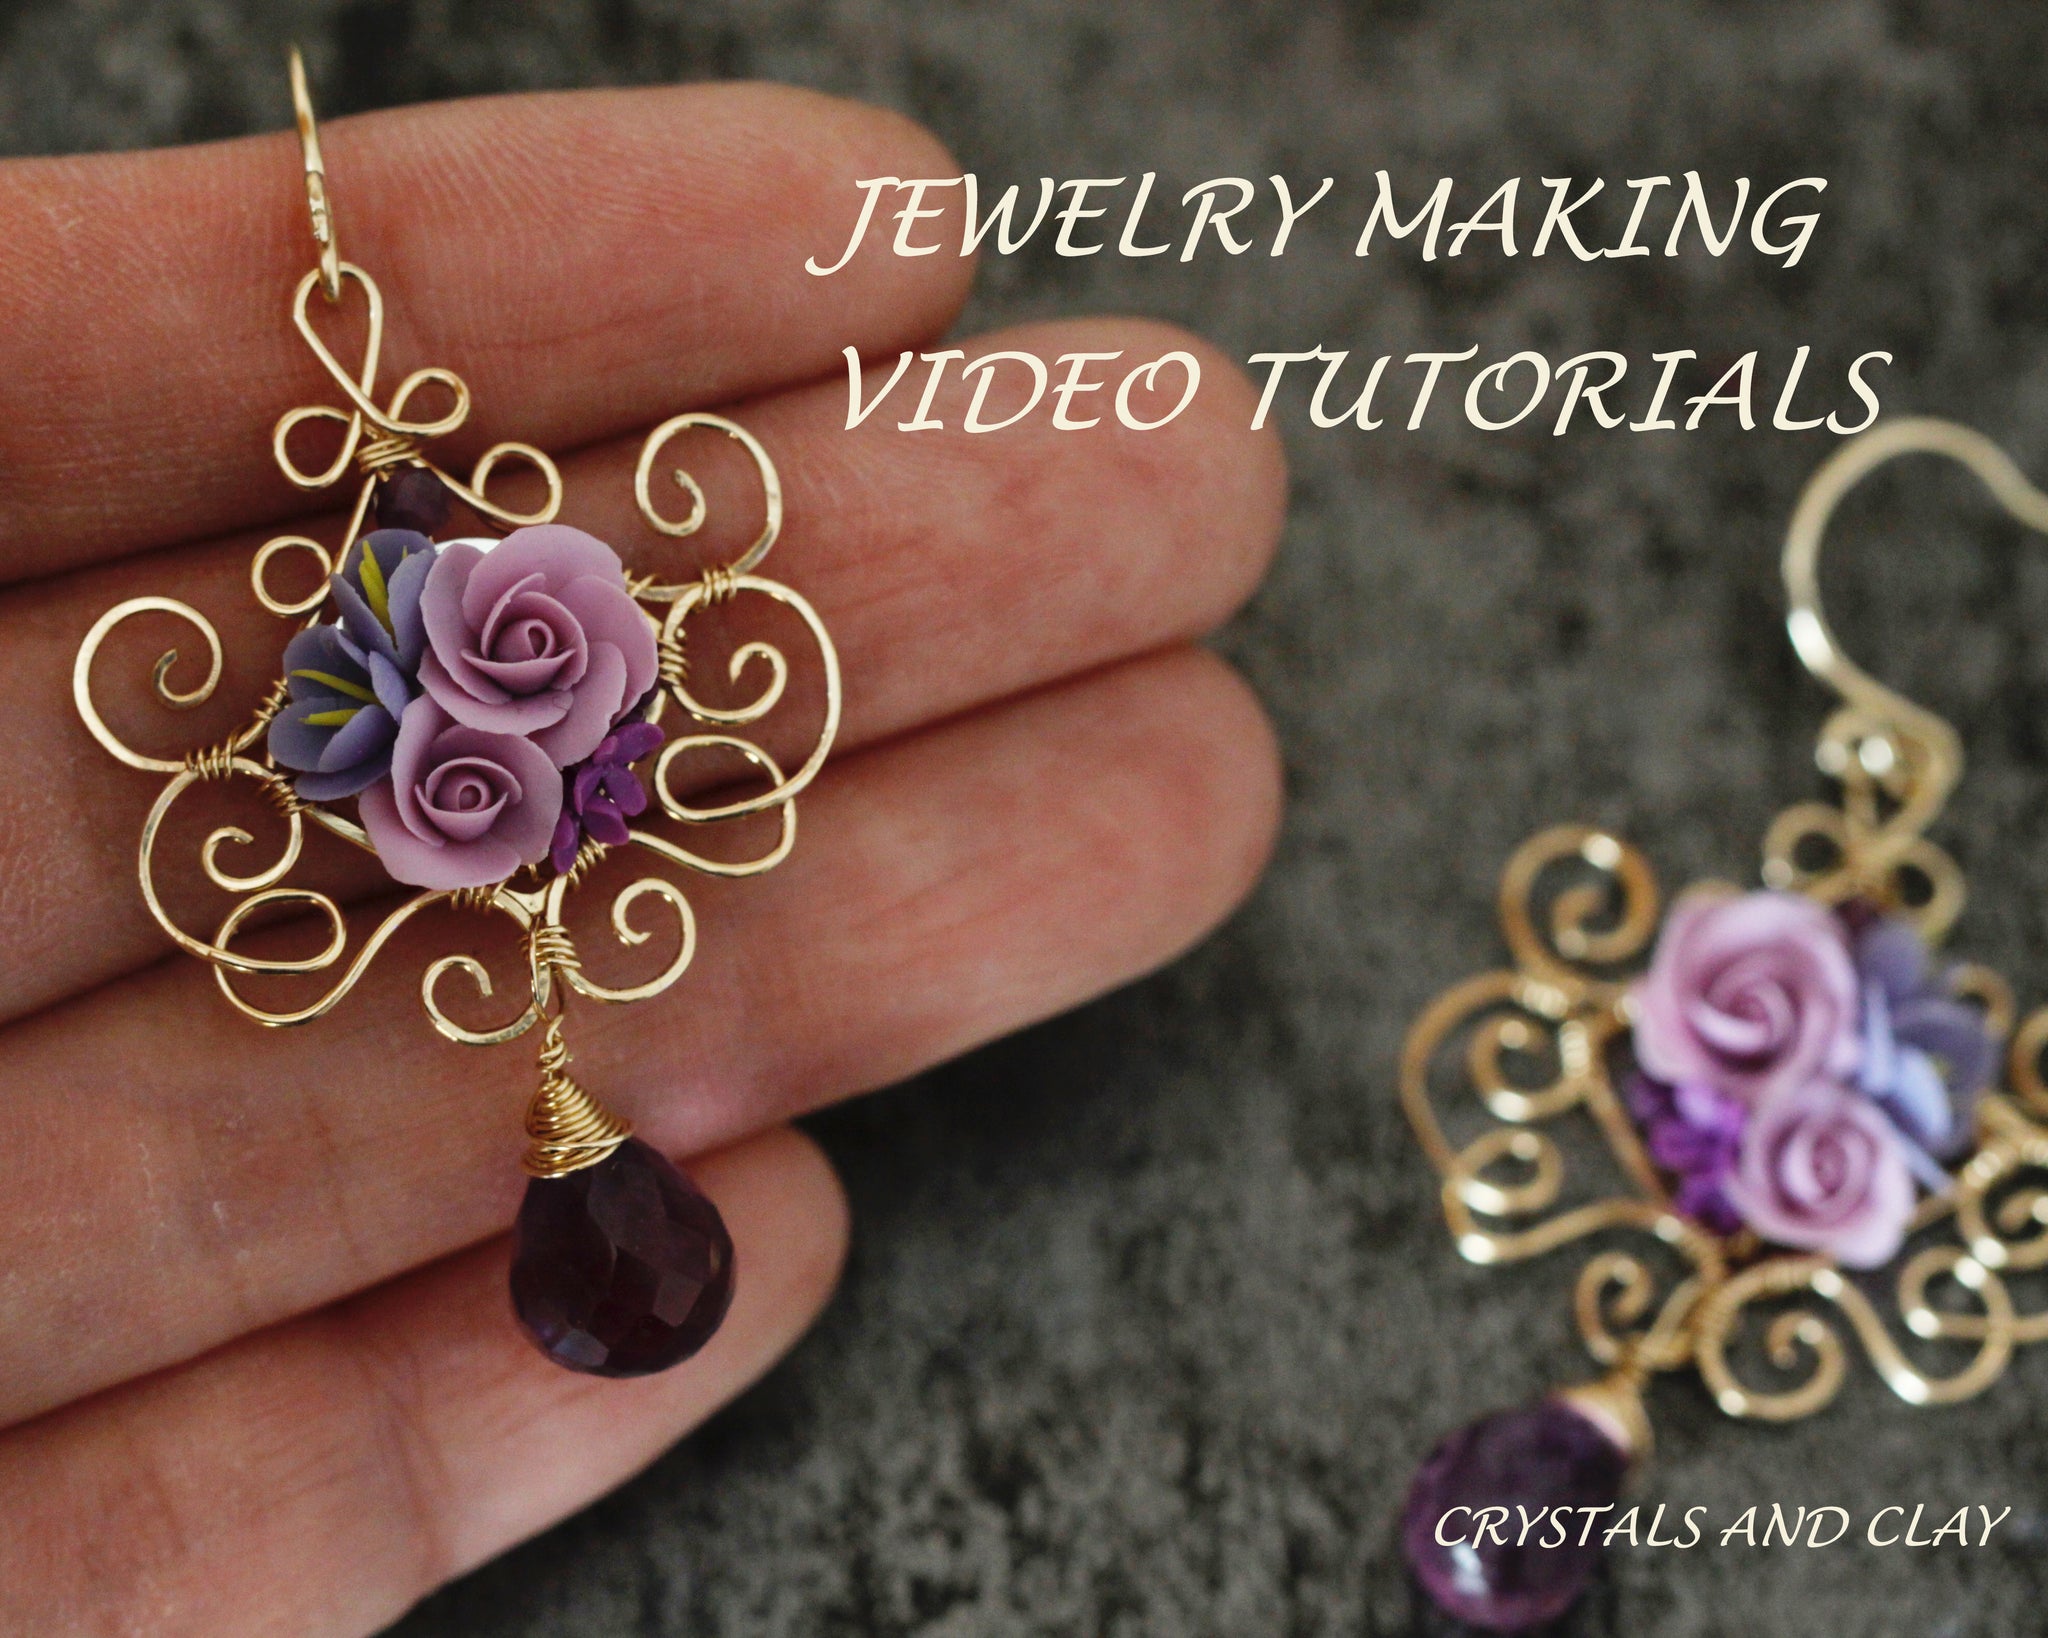 Polymer Clay Tutor Bead and Jewelry Making Tutorials » Triple